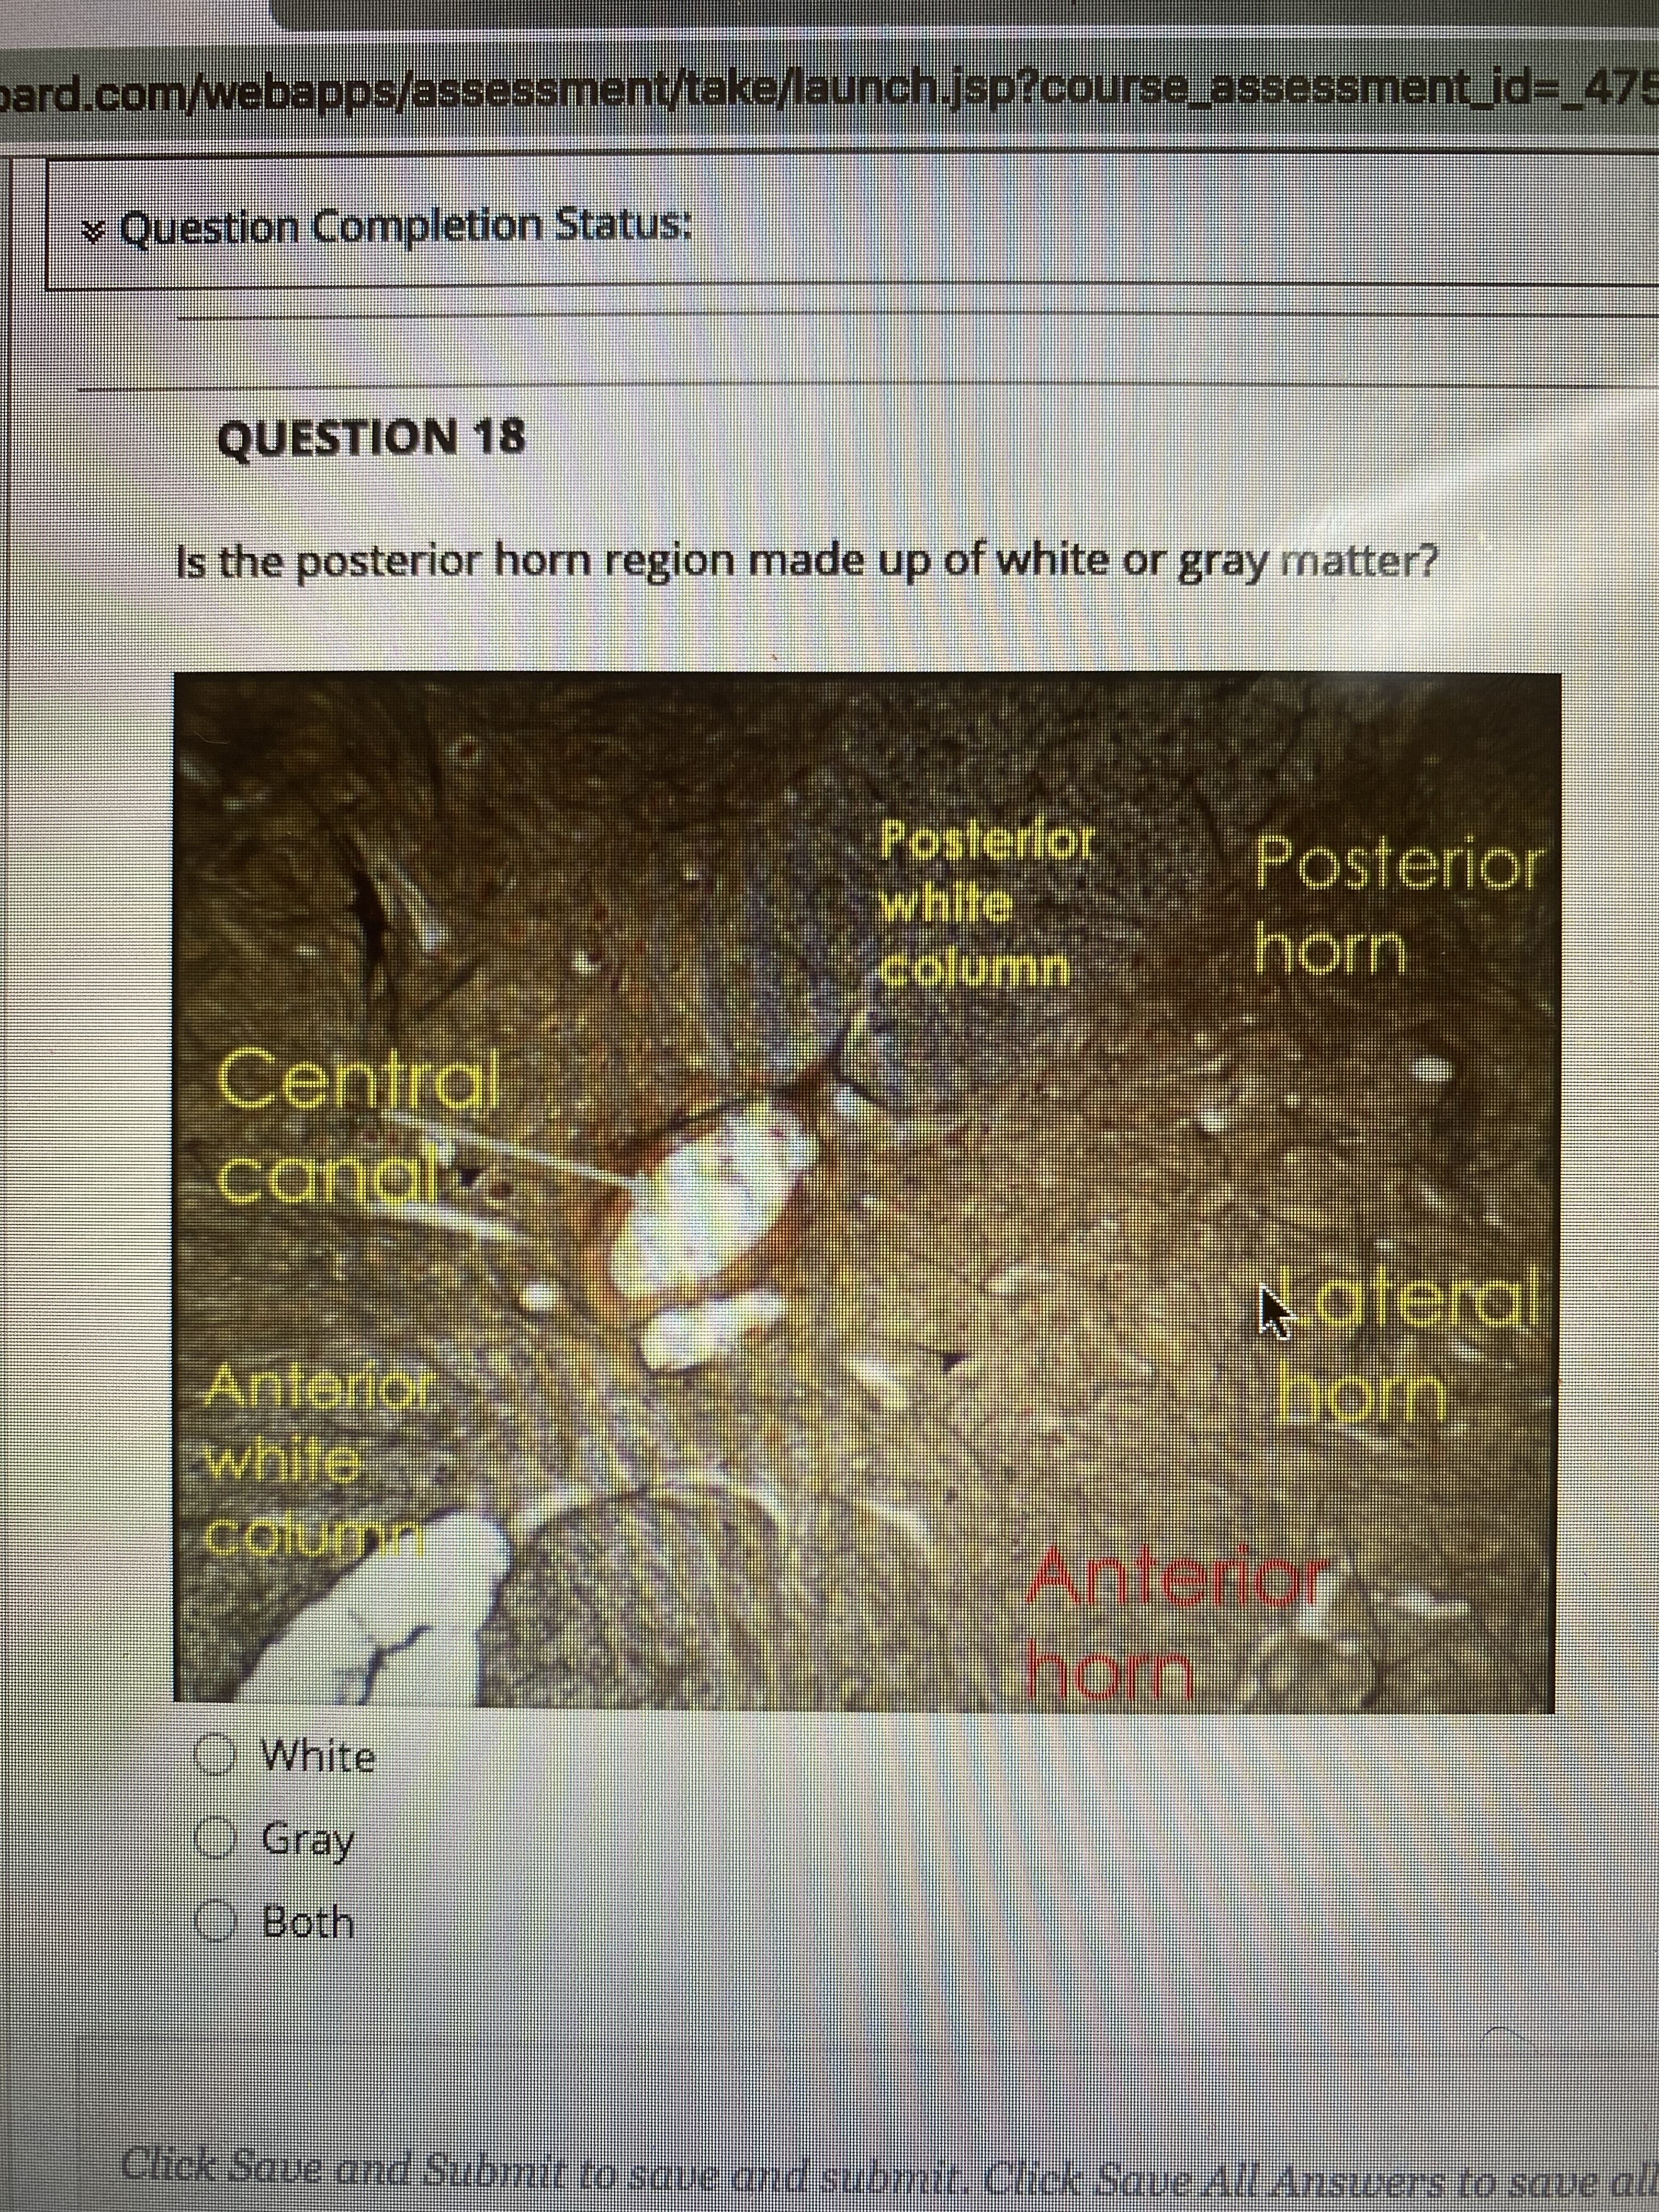 Is the posterior horn region made up of white or gray matter?
